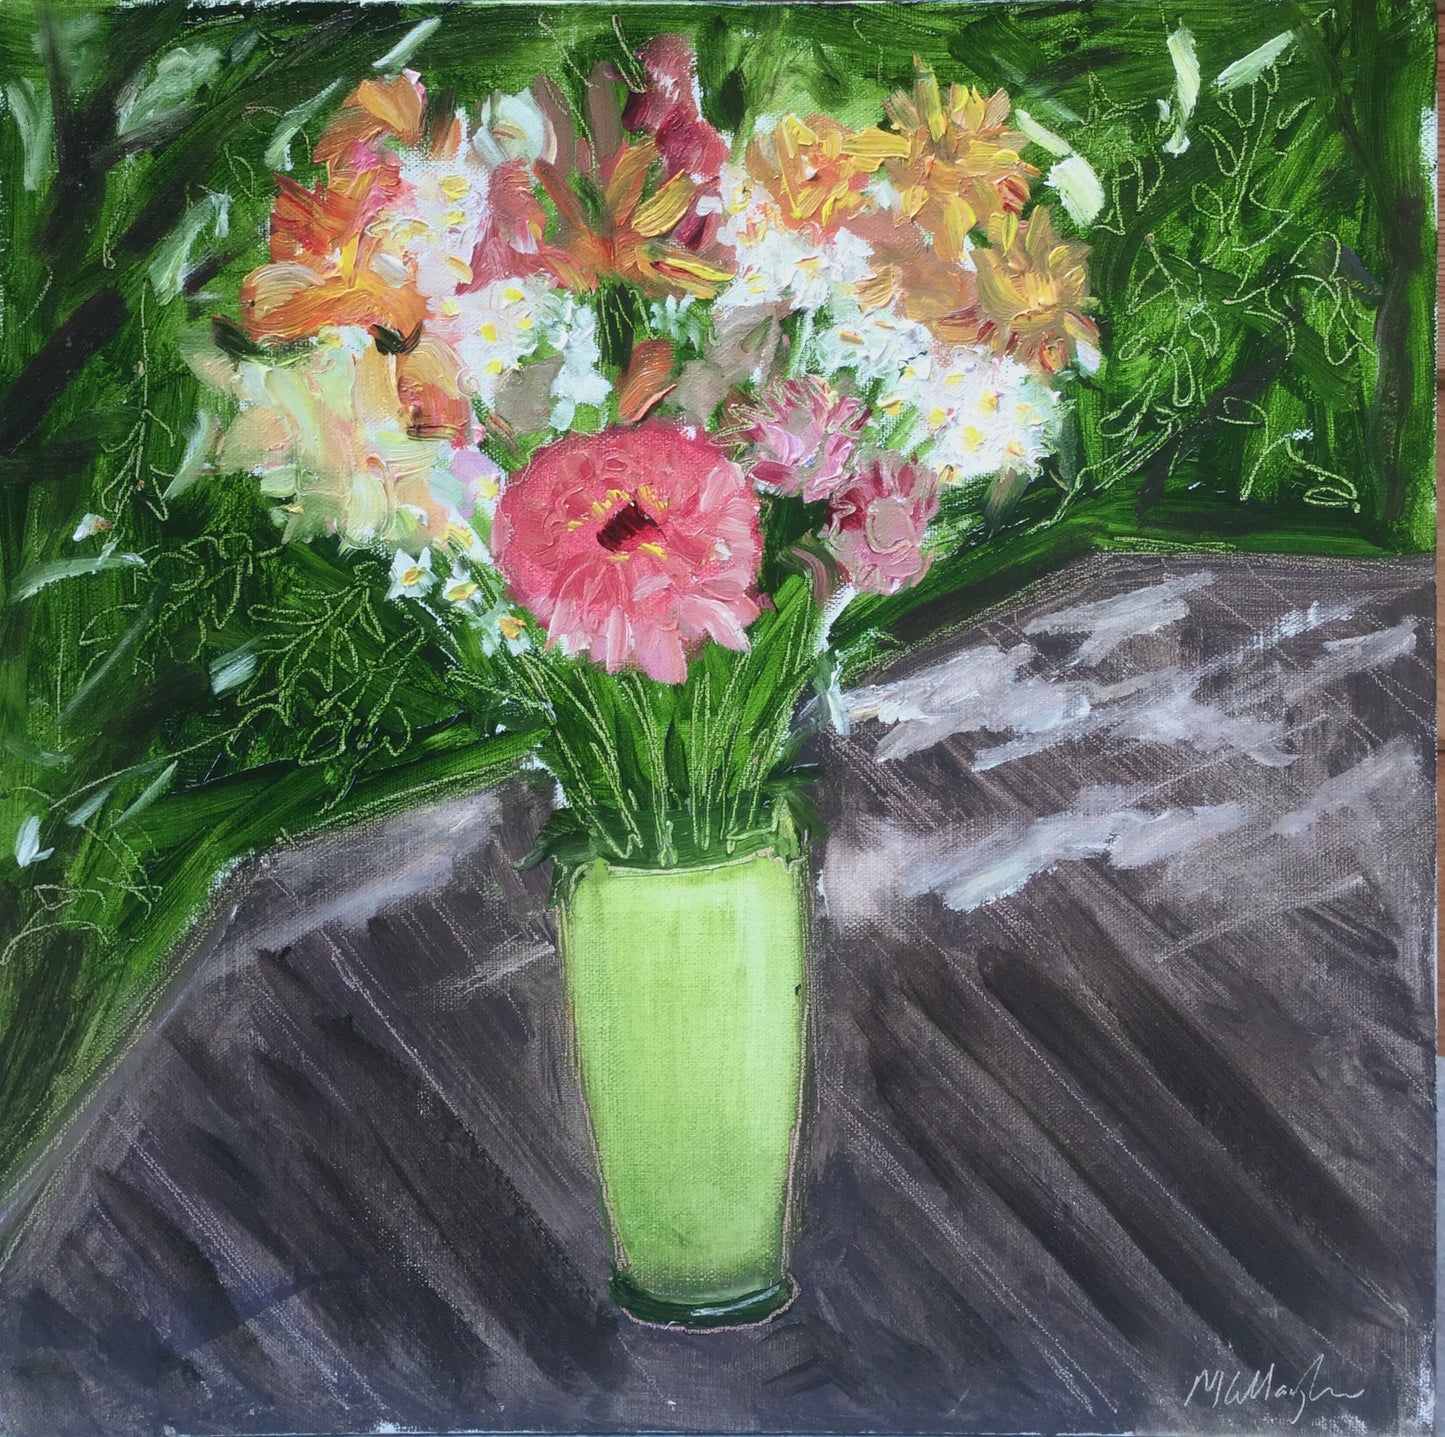 Farmstand Flowers, Green Vase, July 13th, 2020